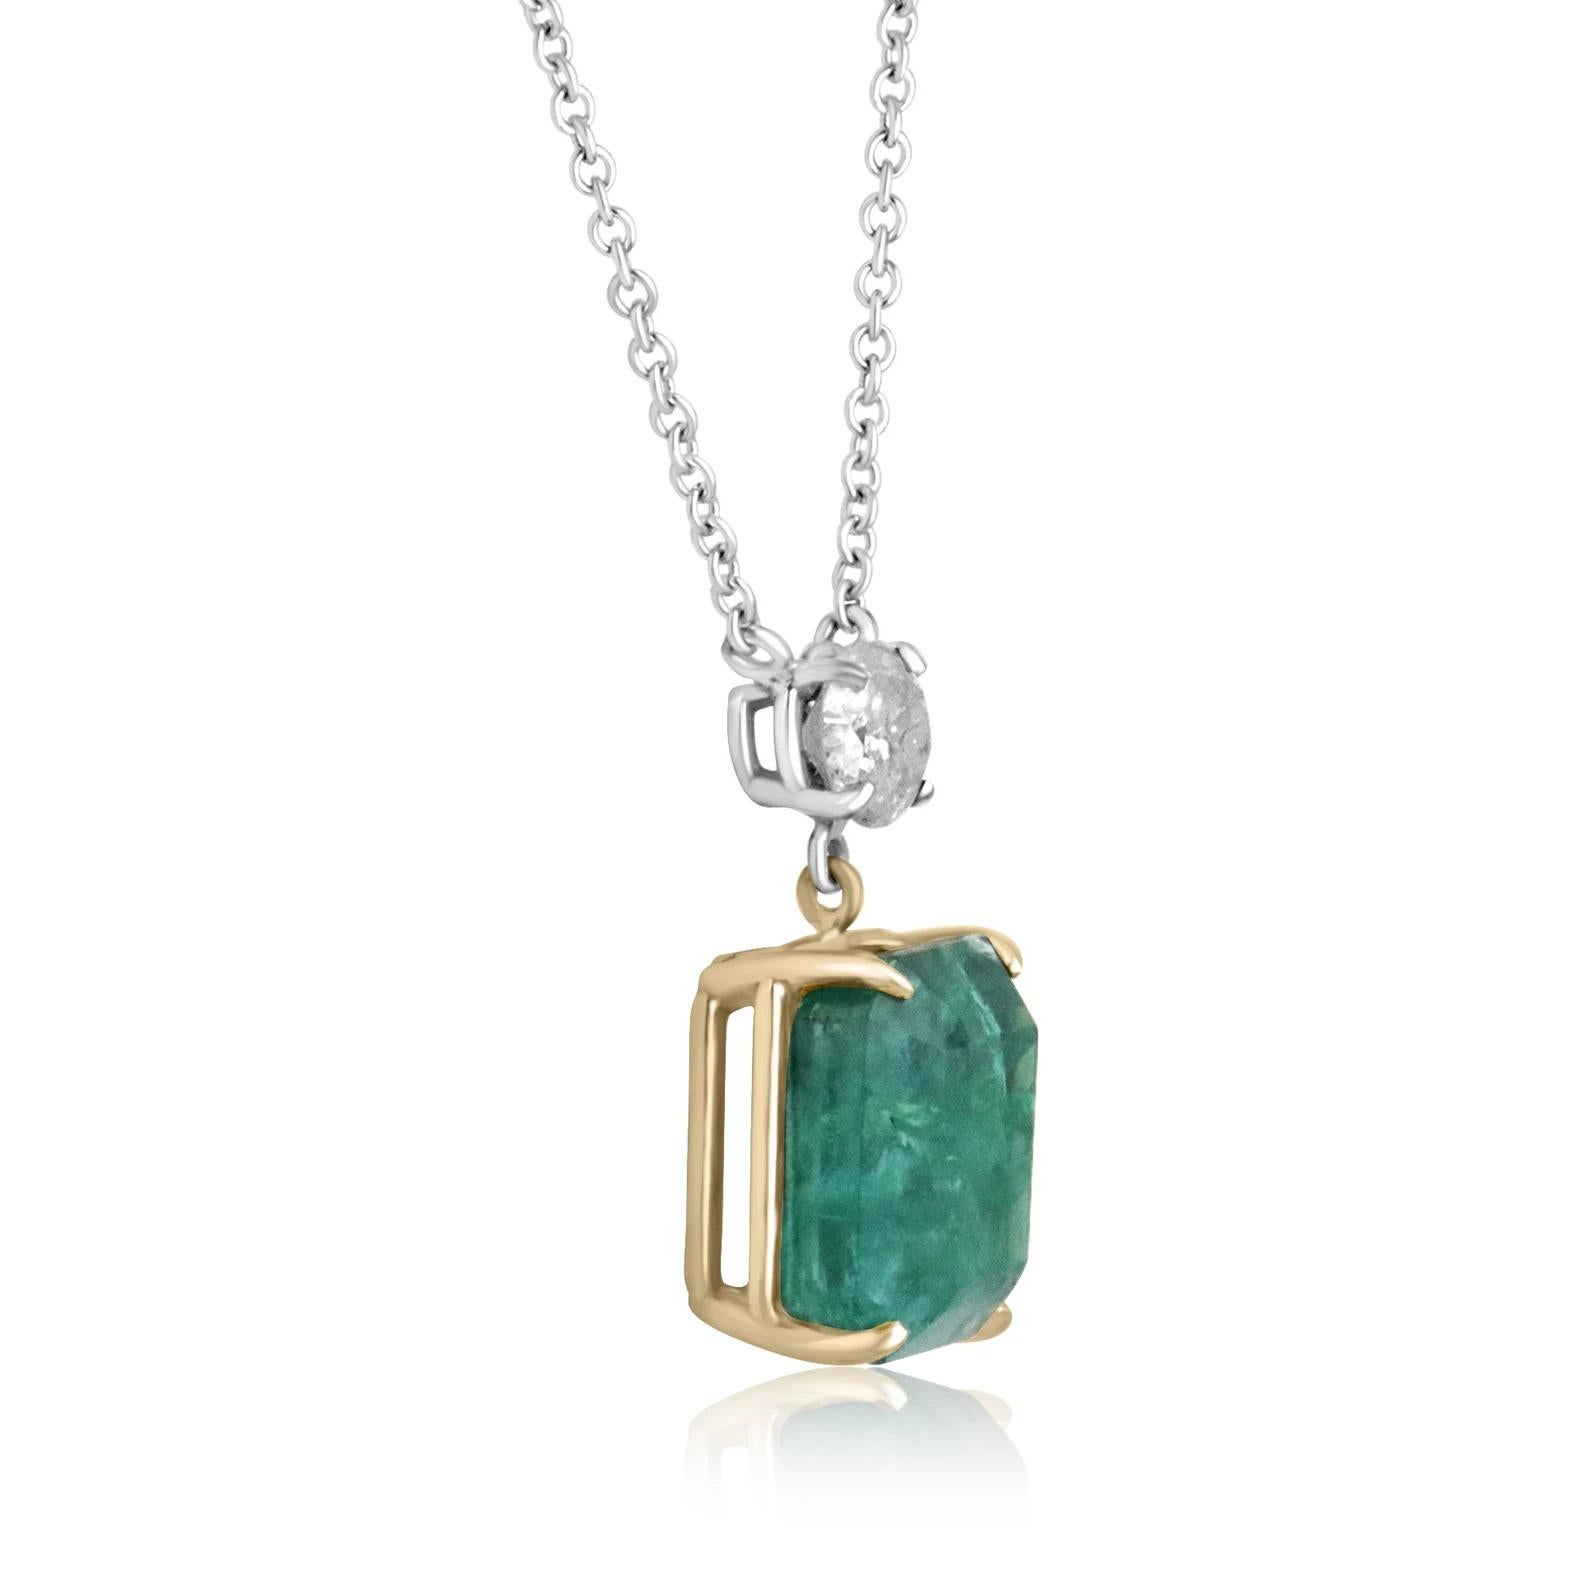 Take a look at this stunning emerald and diamond necklace. The natural, Zambian emerald carries a full 9.67-carats. The stone displays deep green color and incredible natural imperfections that will have you dazed in its mystic beauty. Accented at